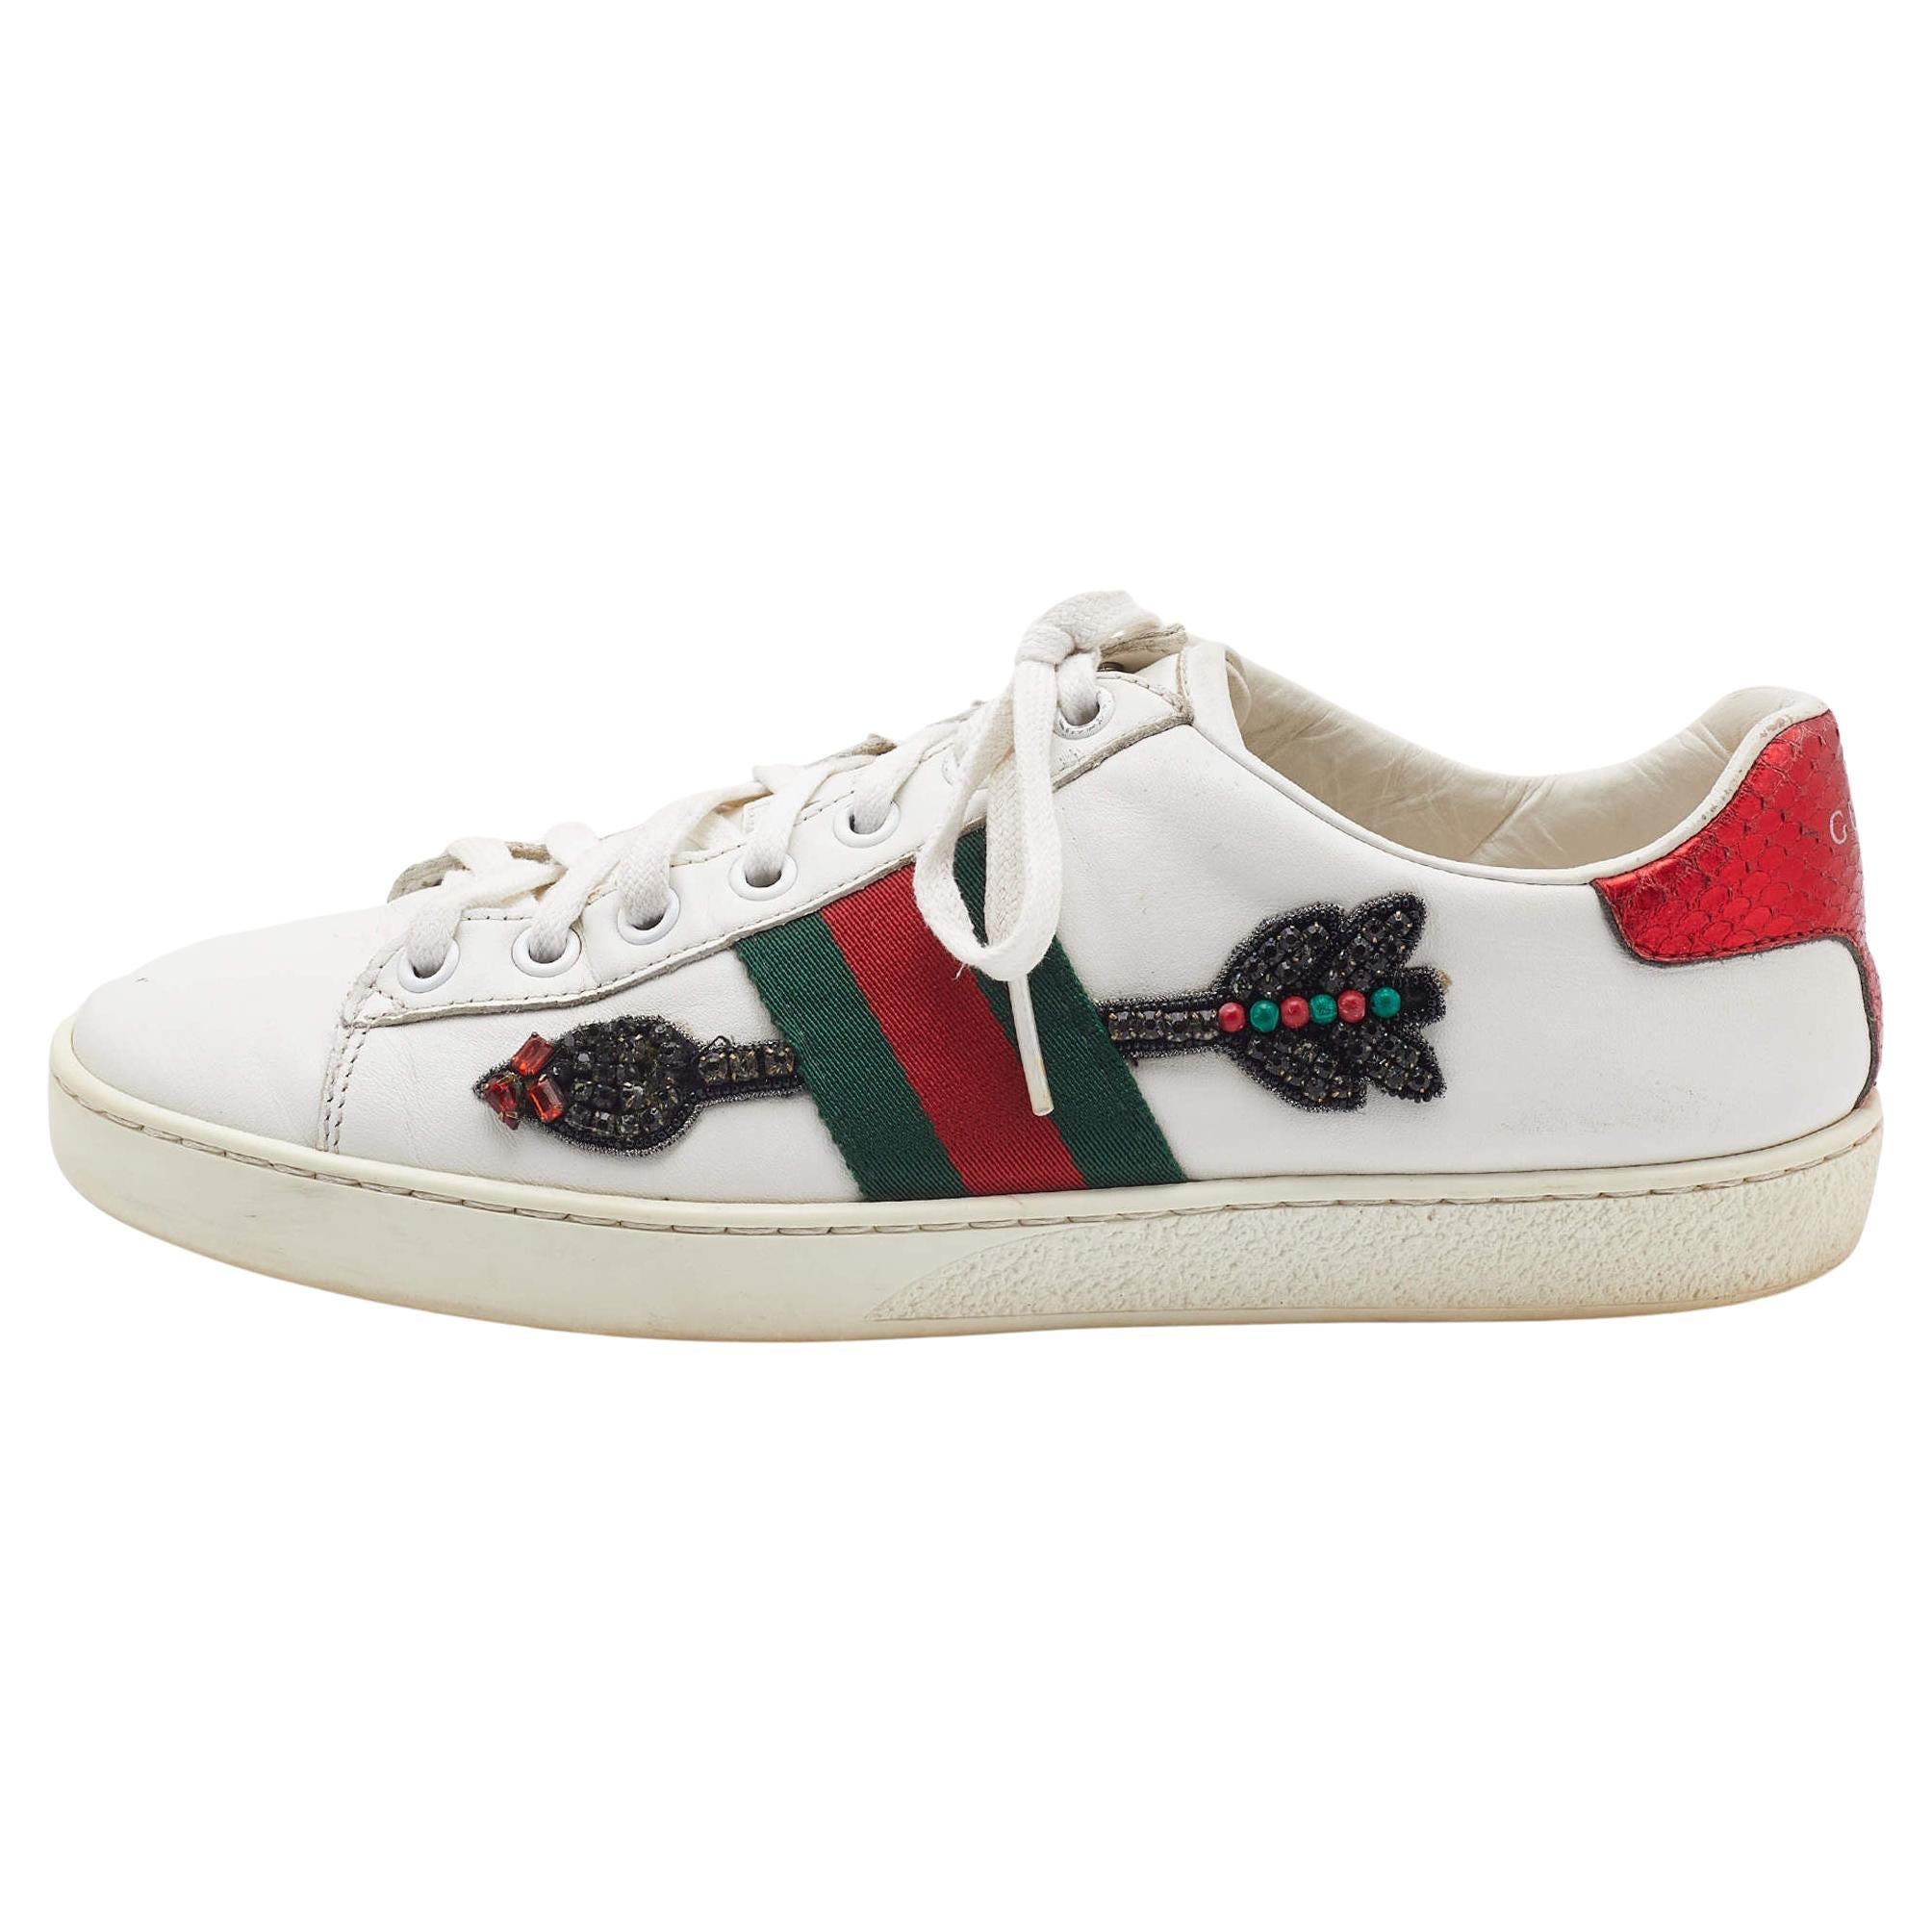 Gucci White Leather Arrow Embellished Ace Low Top Sneakers Size 37